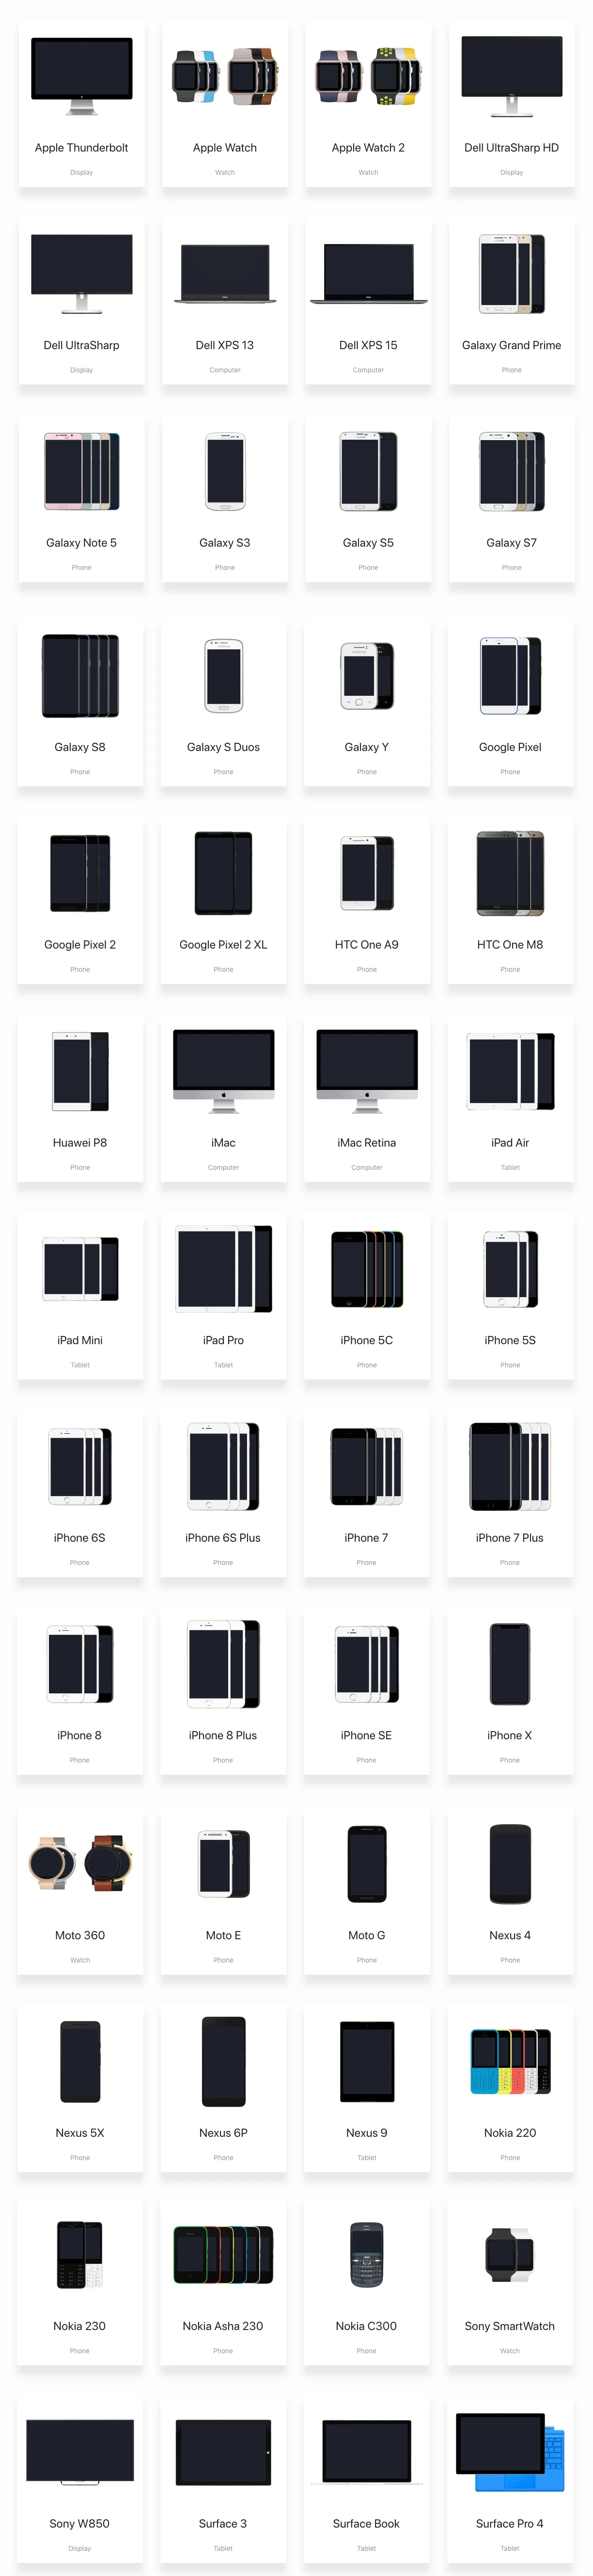 Devices by Facebook - Images and Sketch files of popular devices